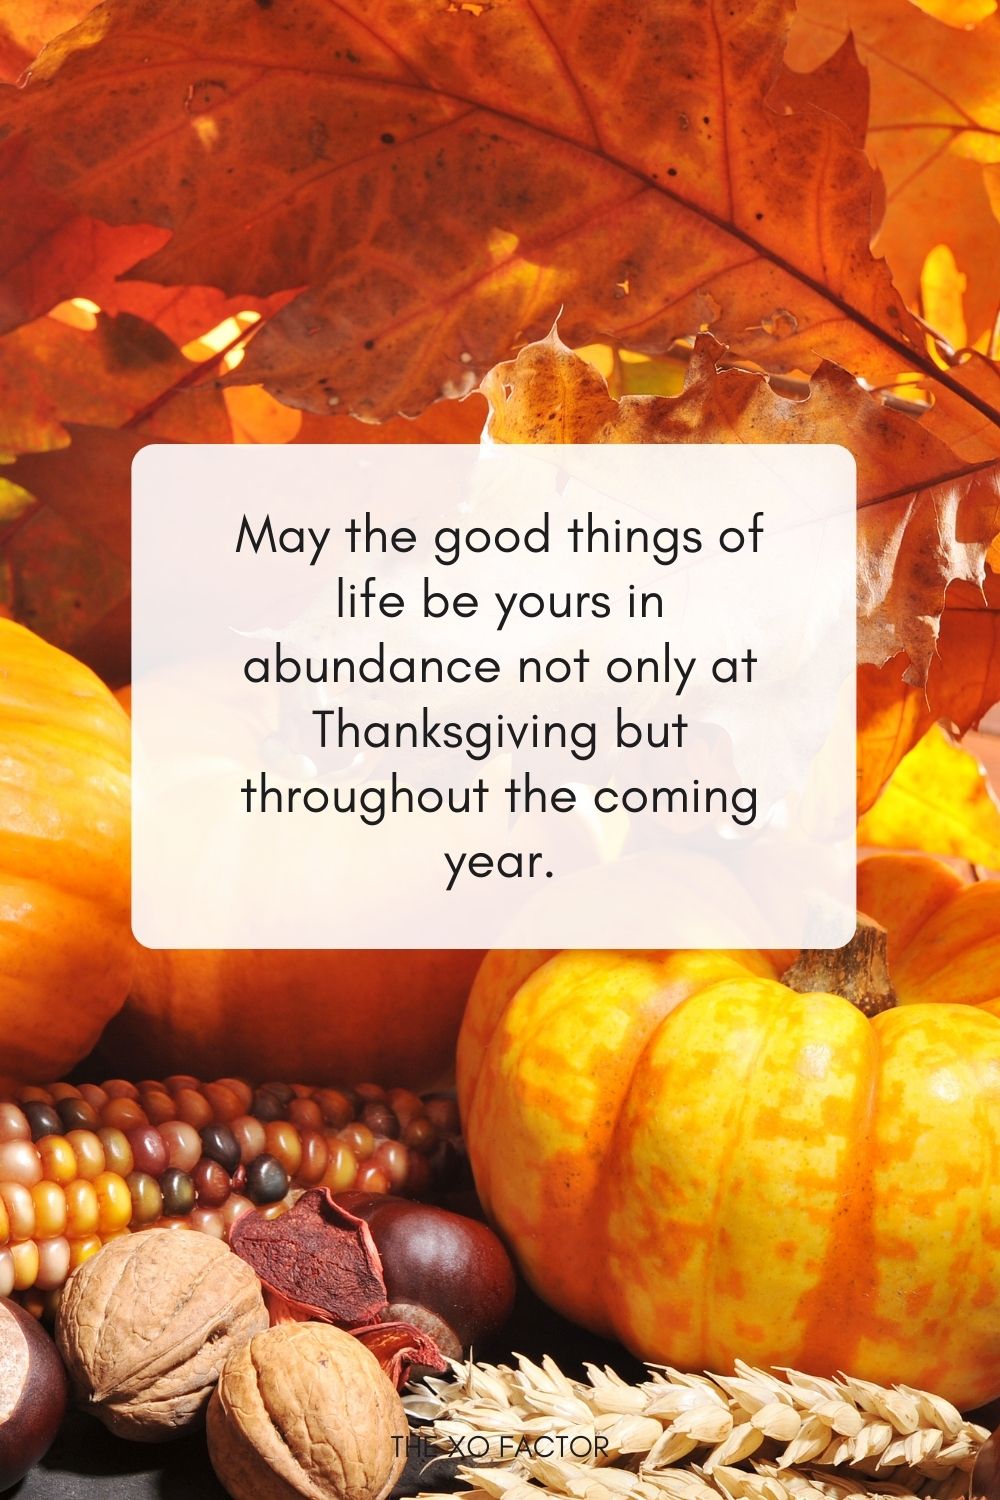 May the good things of life be yours in abundance not only at Thanksgiving but throughout the coming year.